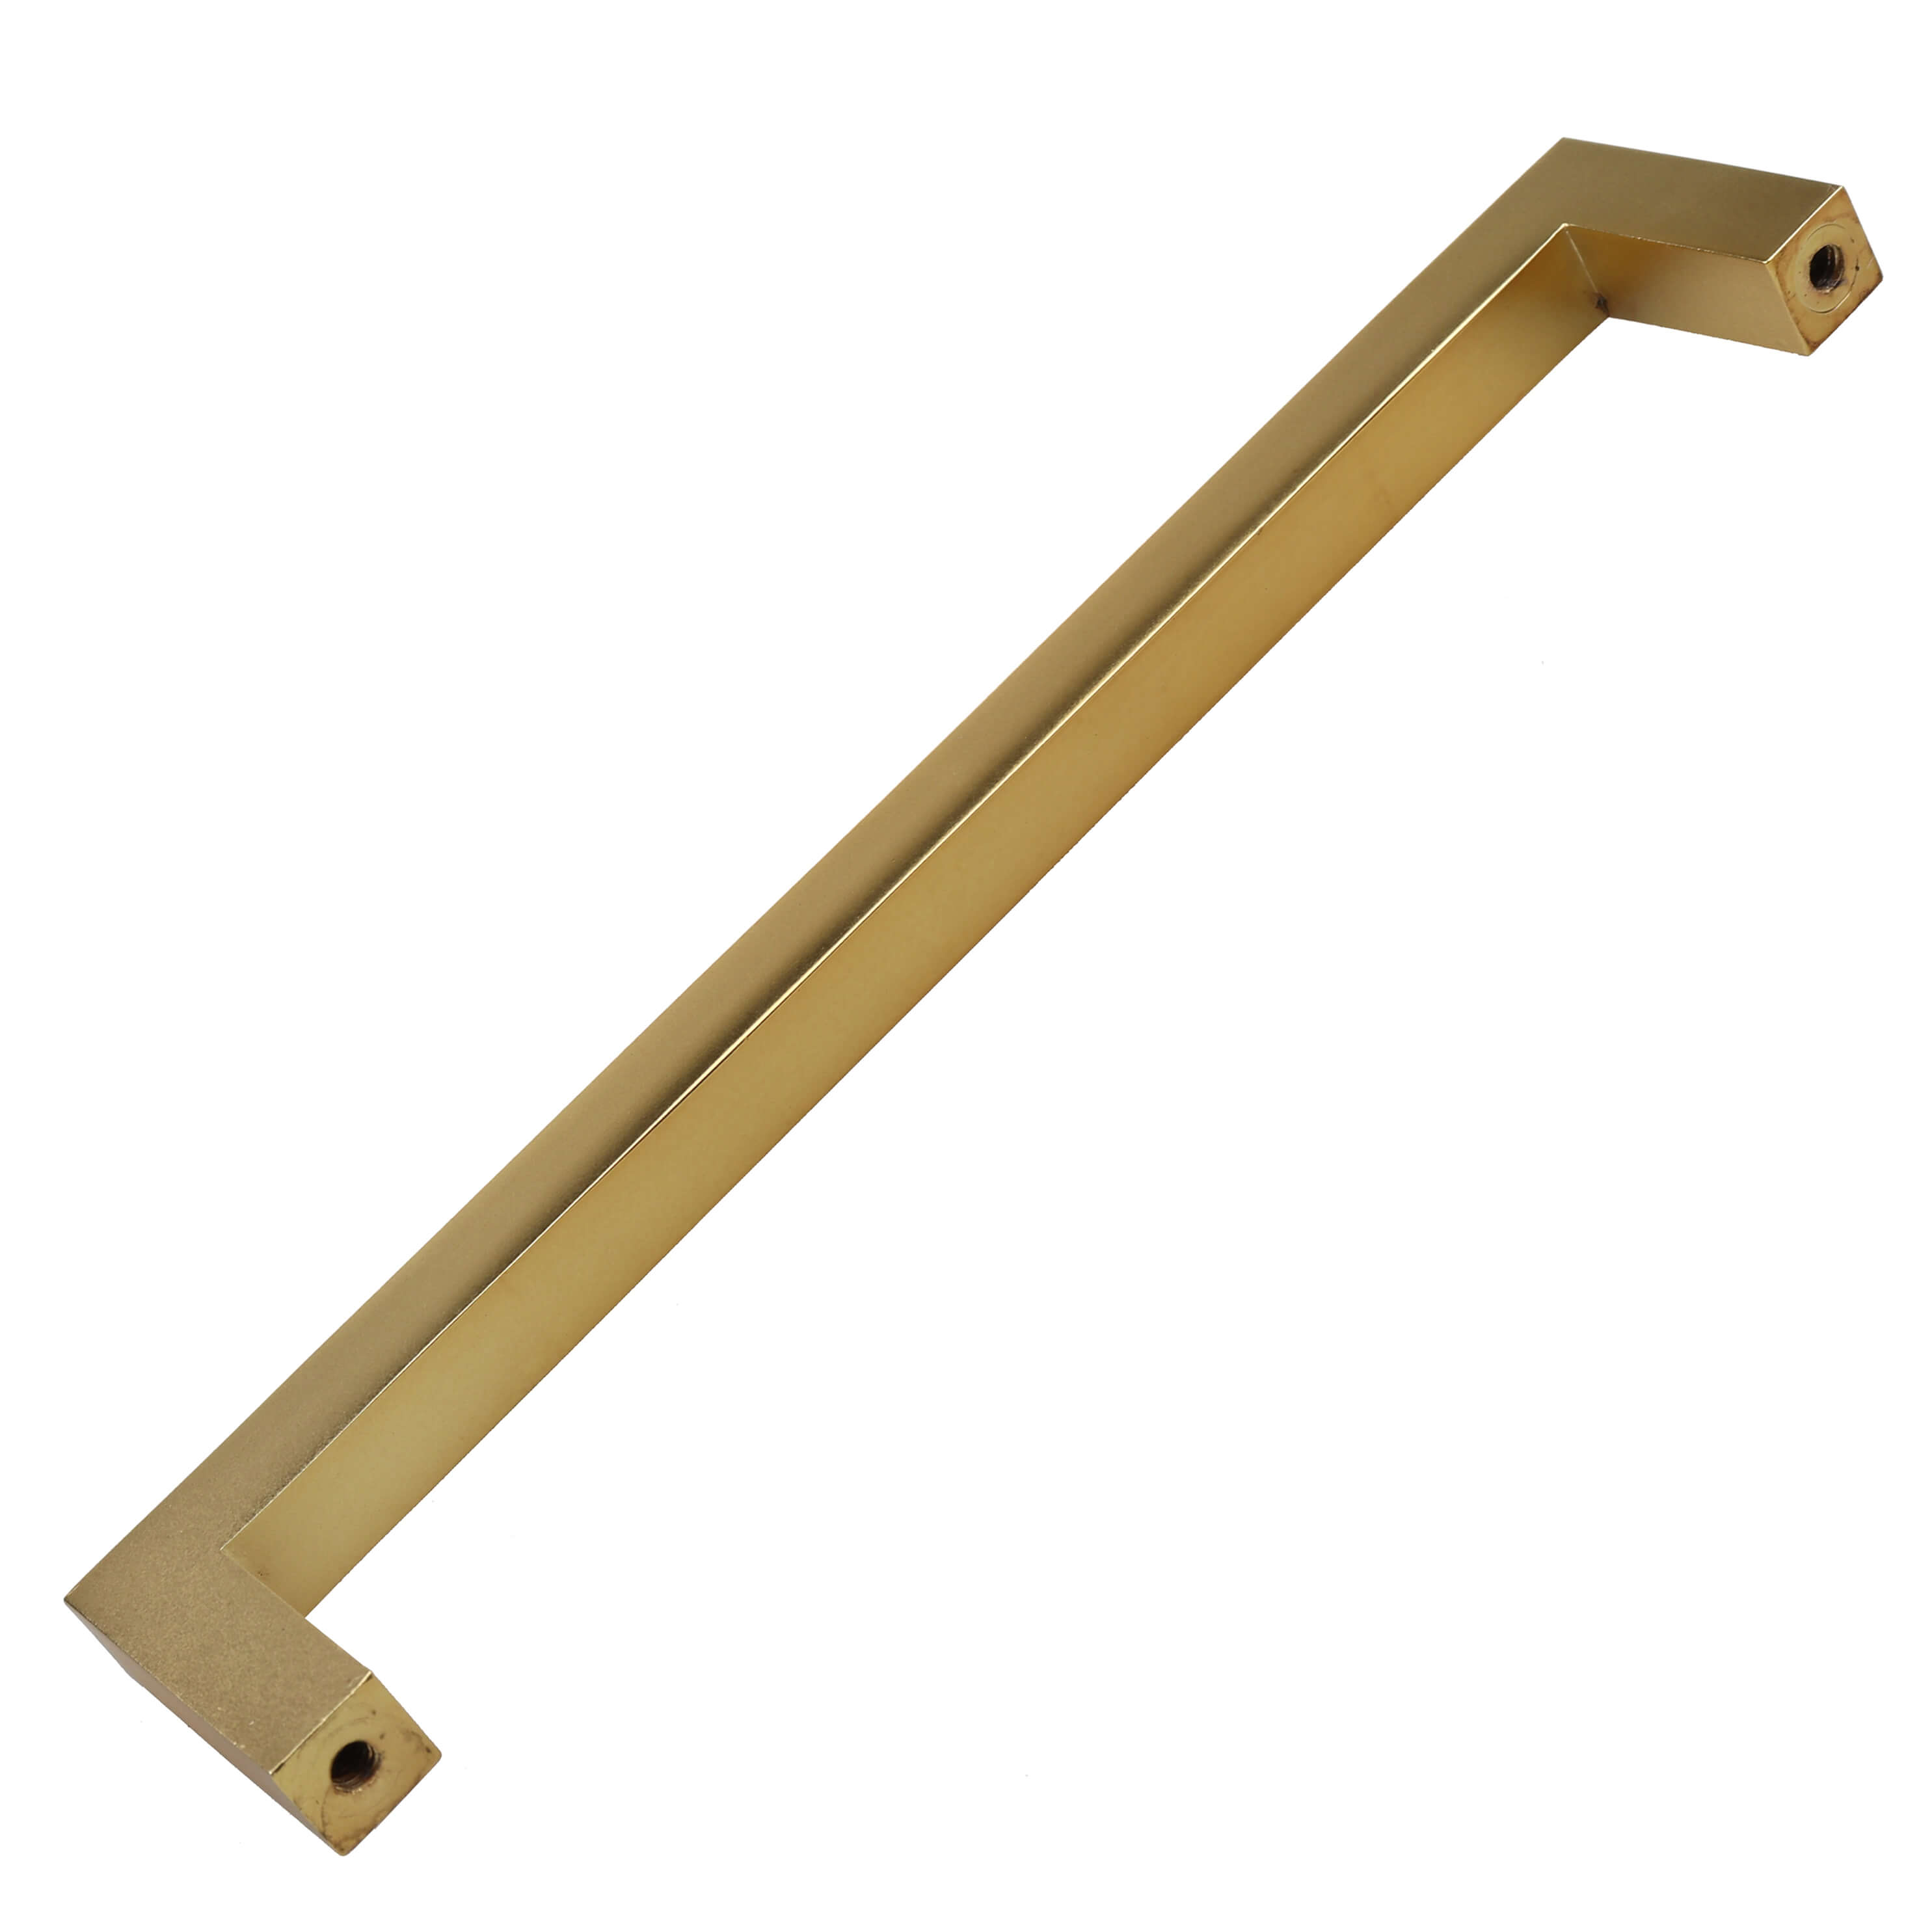 GlideRite 6-1/4 in. Center Solid Square Bar Cabinet Pulls, Brass Gold, Pack of 10 - image 2 of 3